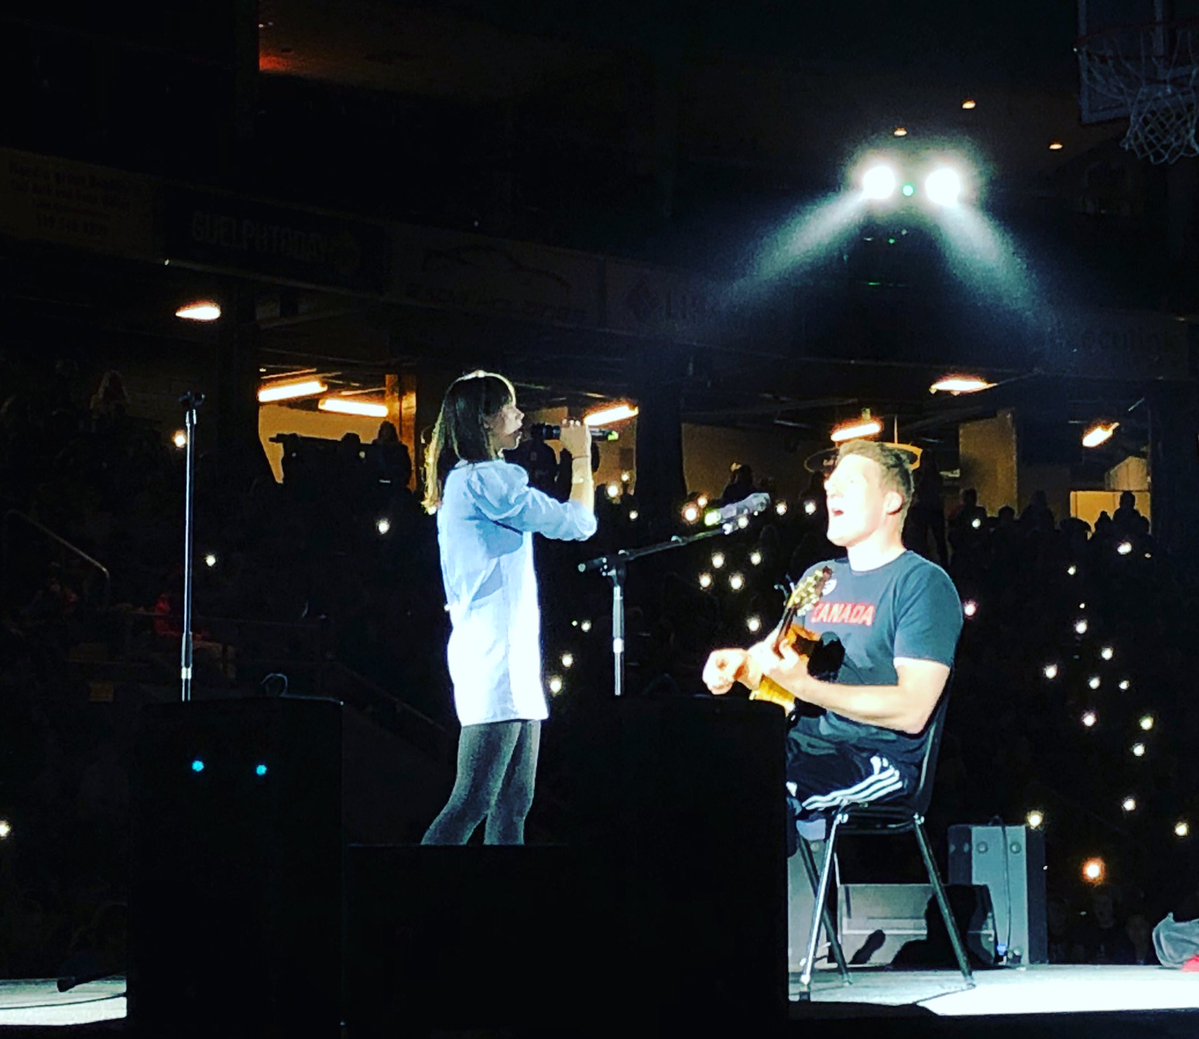 Patrick Anderson sings a song with his wife at Empowerment Day at the Sleeman Centre on Thursday.